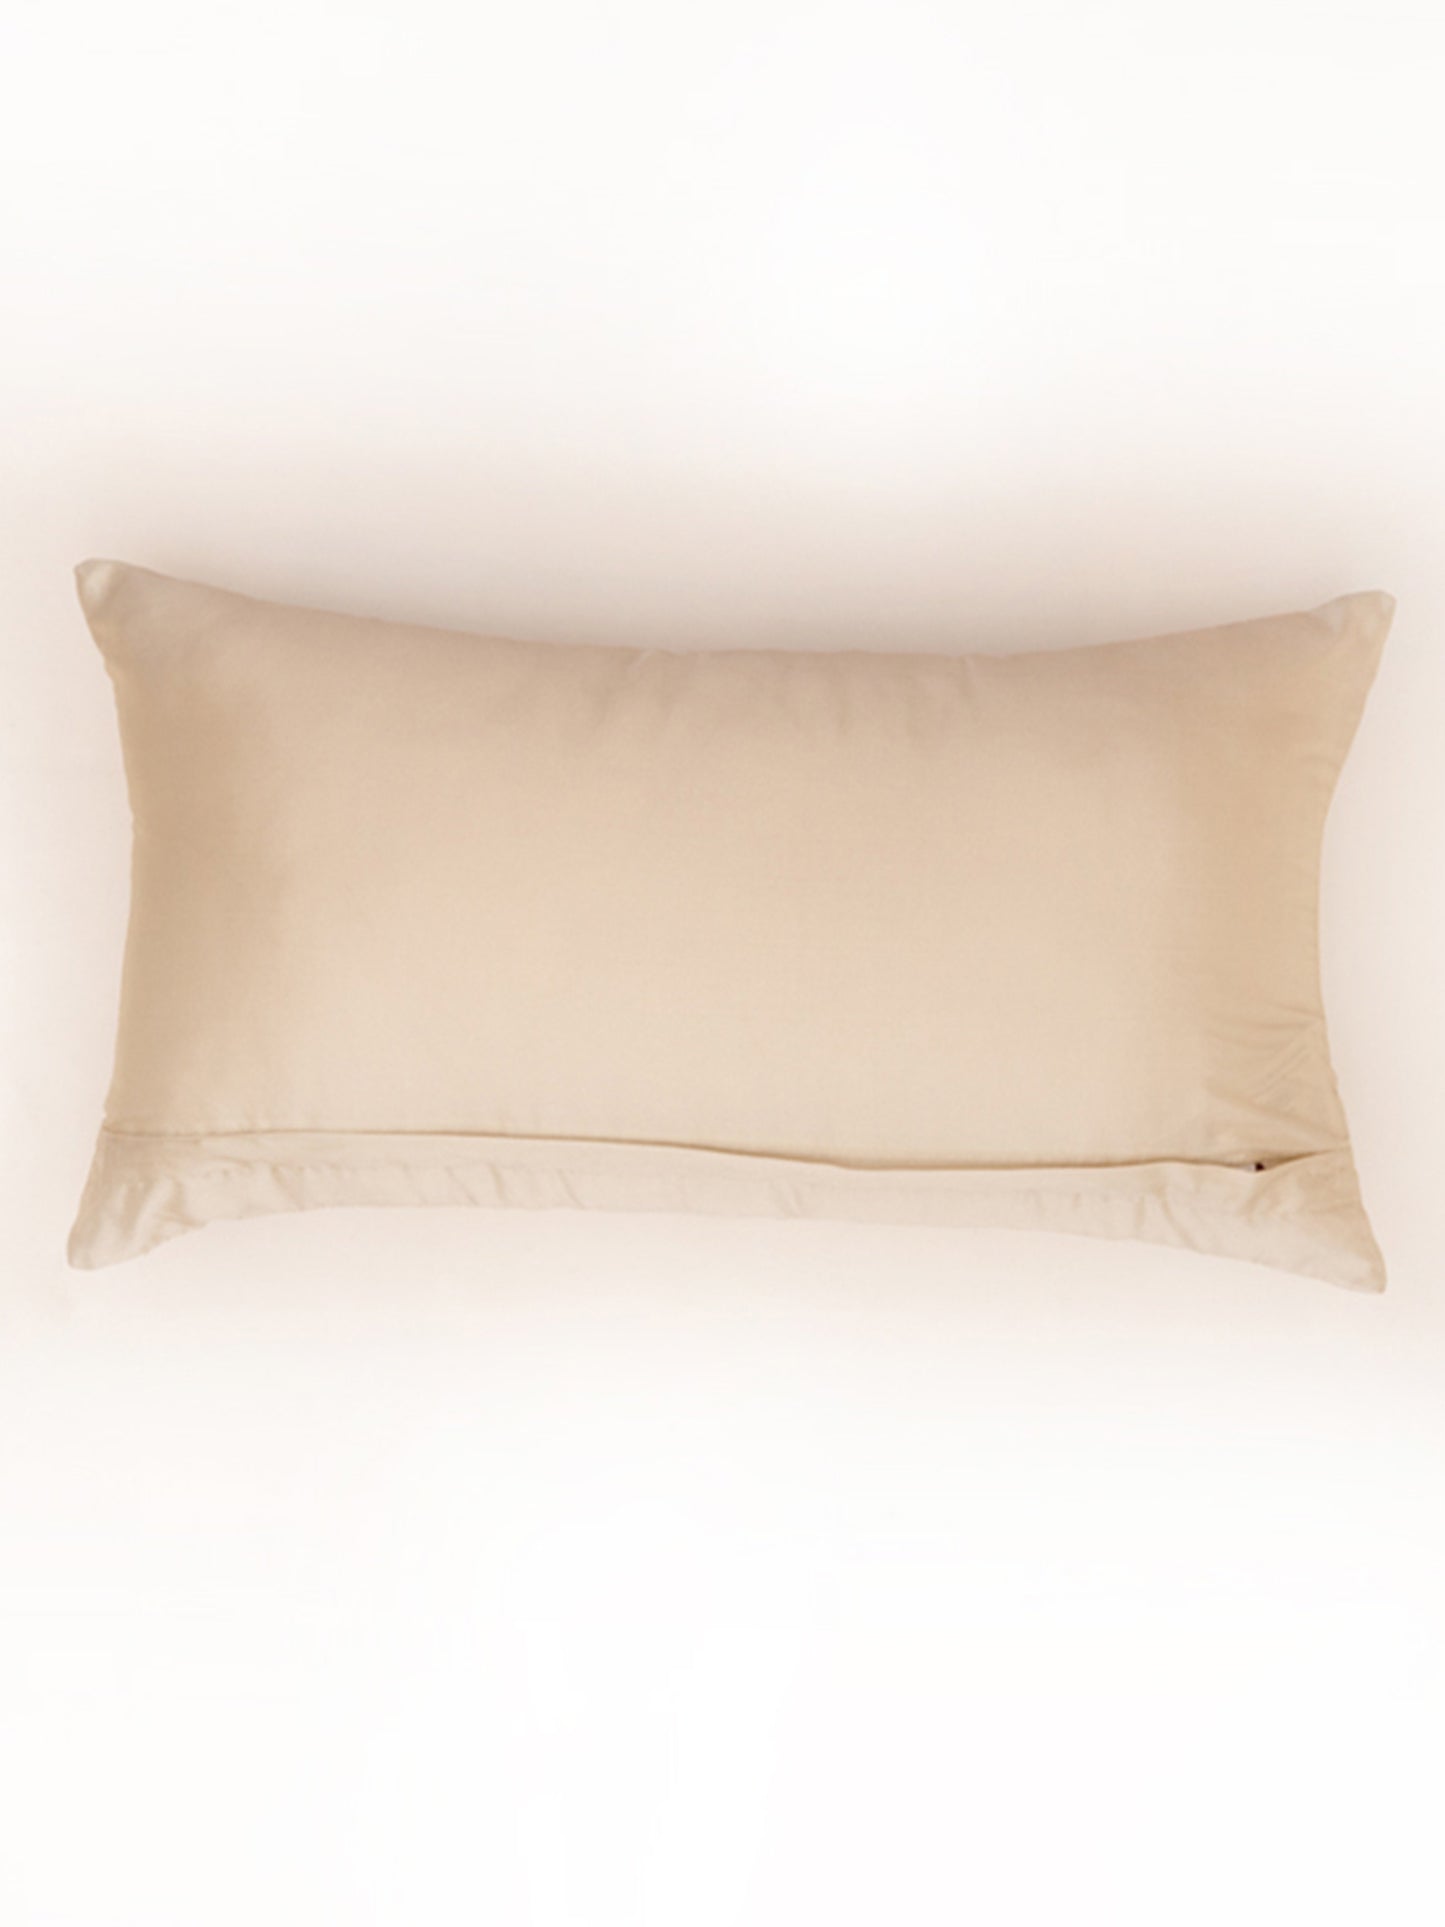 Polyester Stiped Off-White Cushion Cover, 12"X 22"